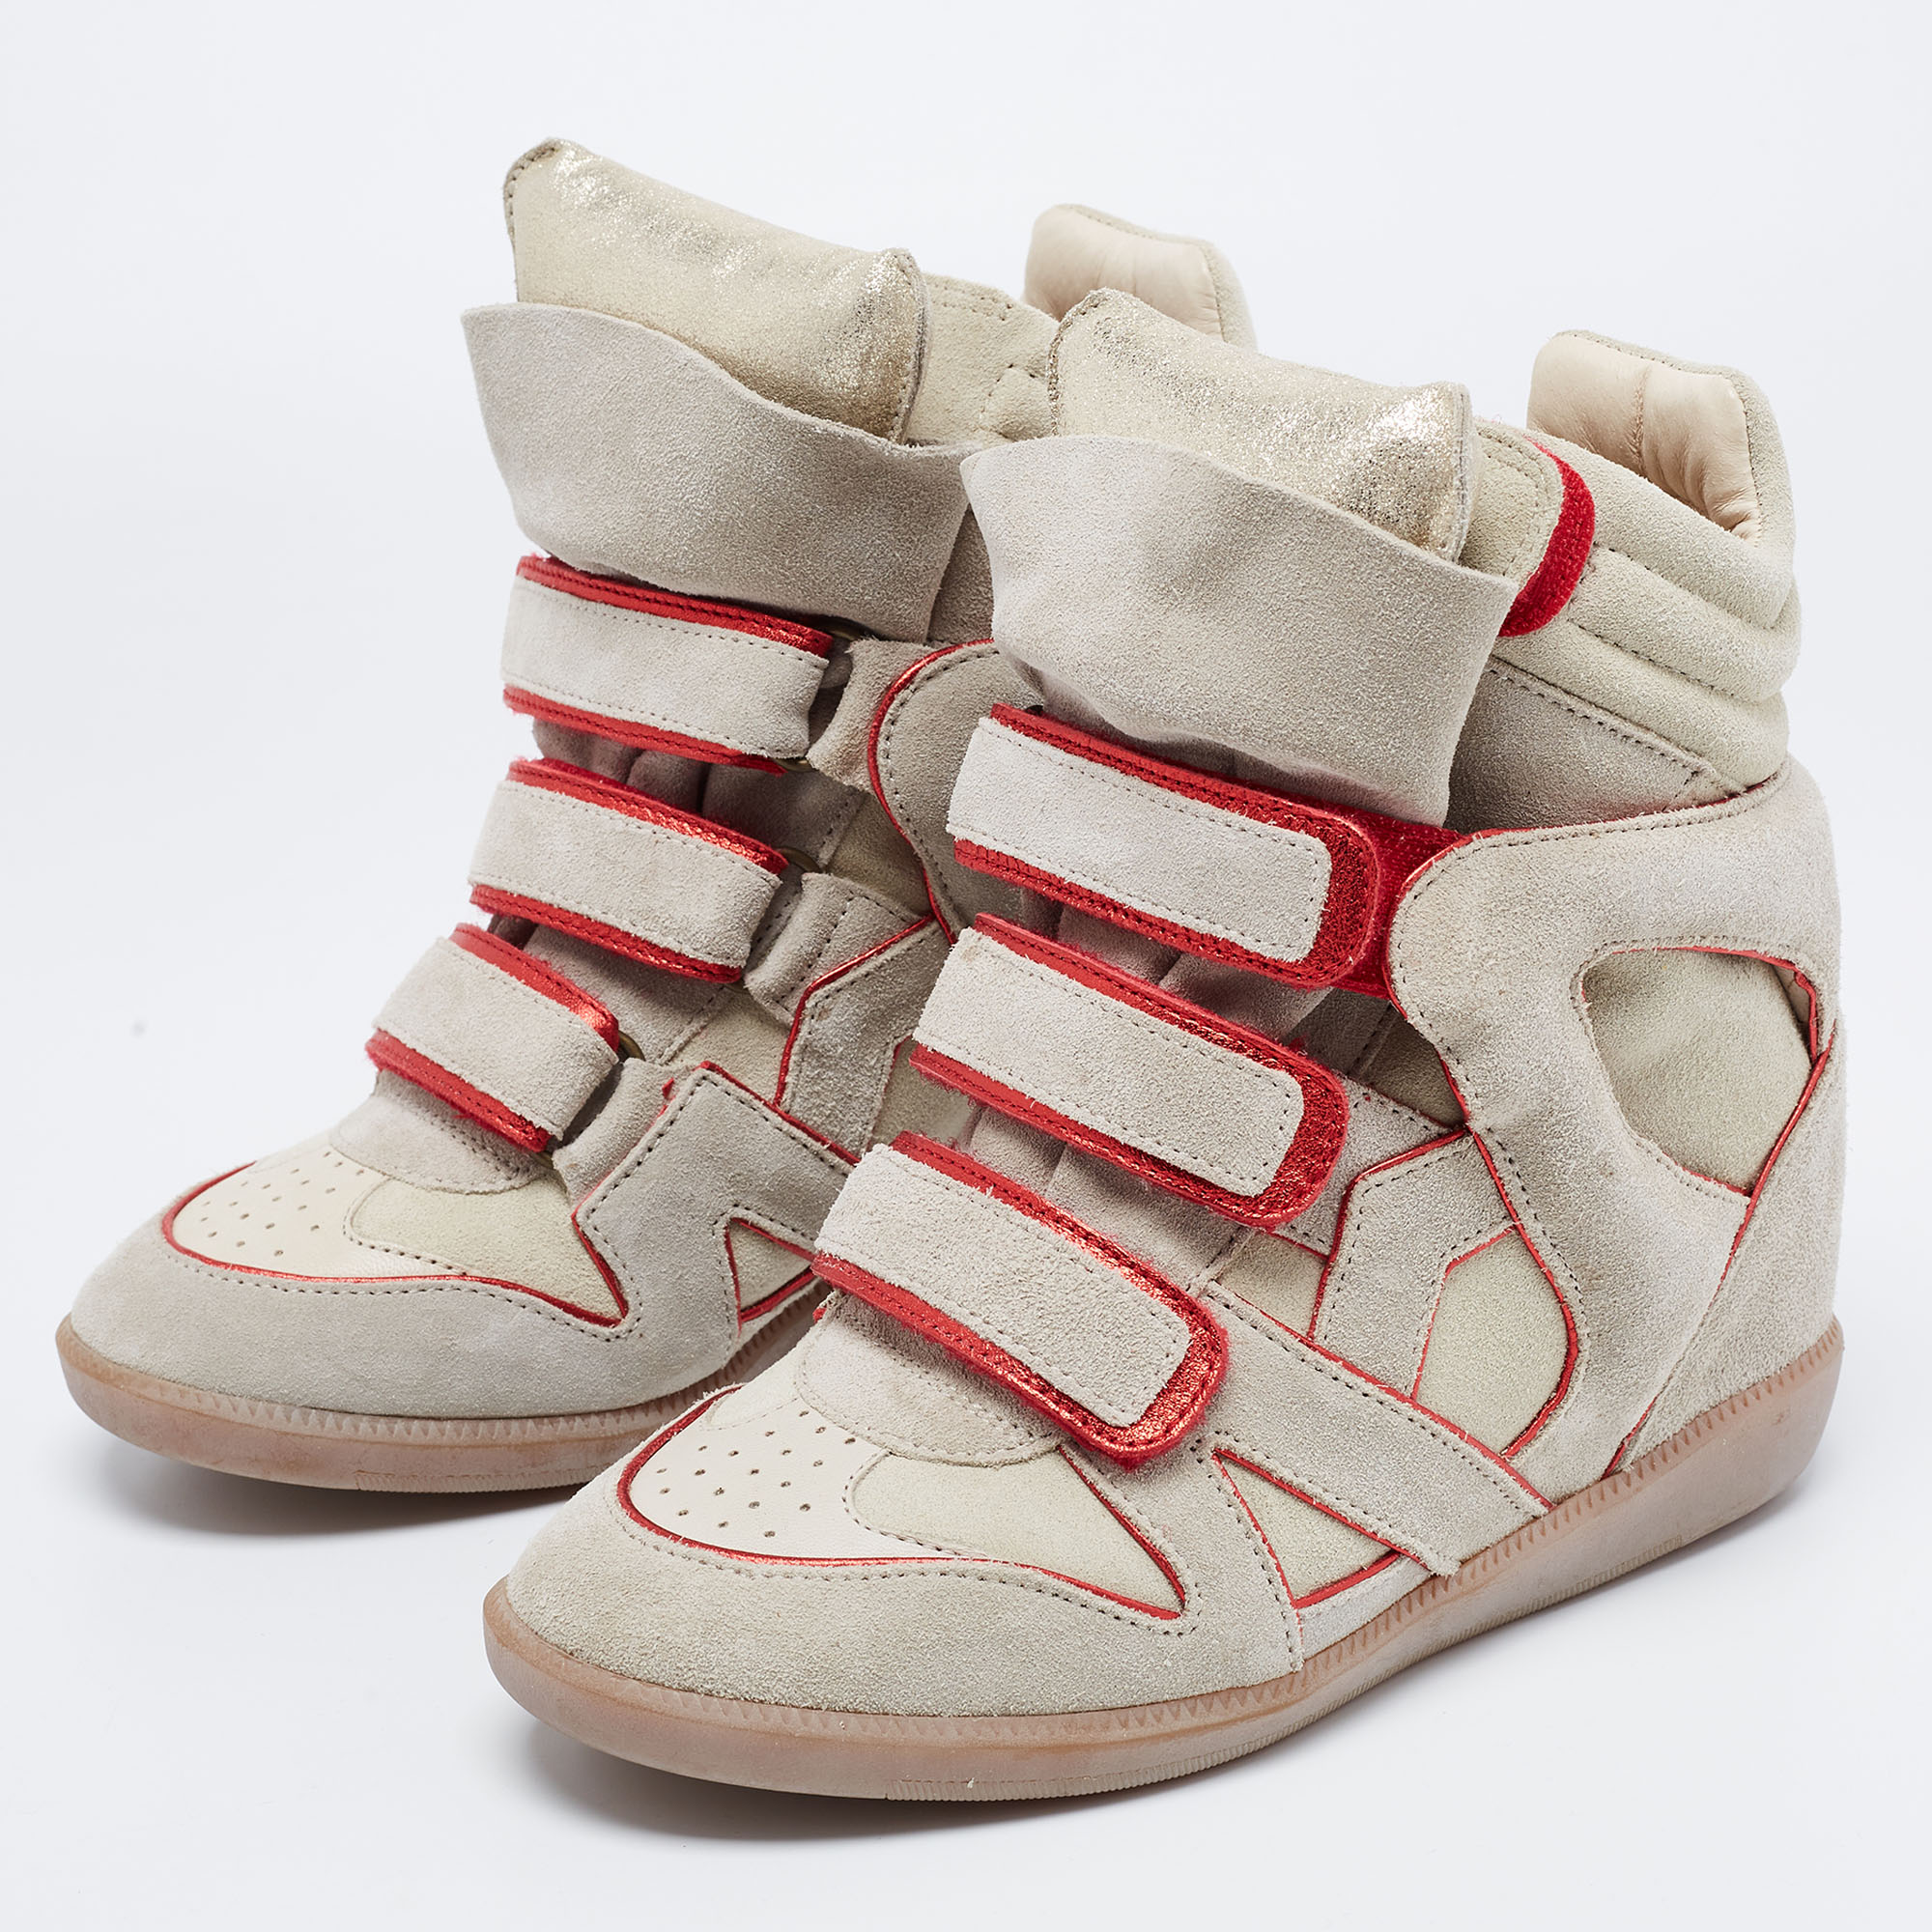 

Isabel Marant Grey/Metallic Red Suede and Leather Bekett Wedge Sneakers Size